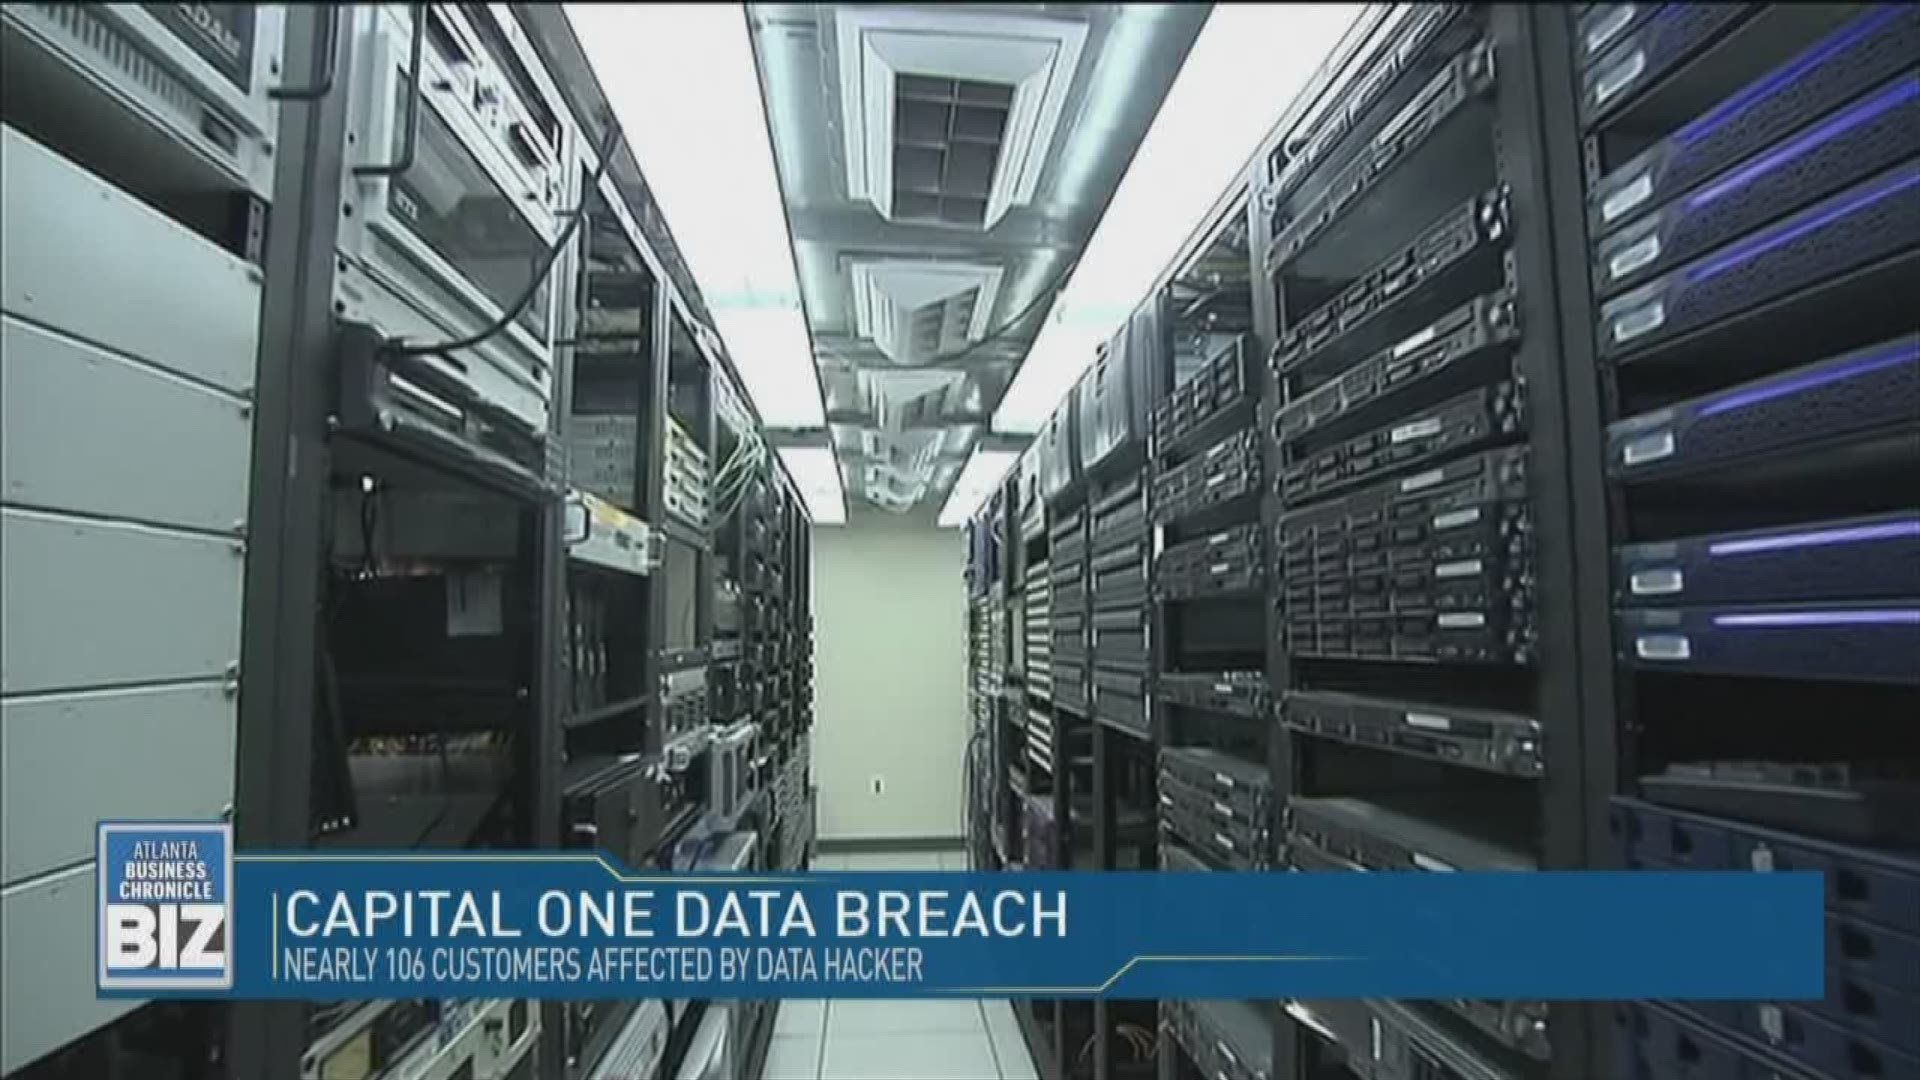 On the heels of Equifax's nearly $700 million settlement for its 2017 data breach, Capital One is dealing with a data breach of its own. The hack affected nearly 106 million people, reigniting concern over privacy and cyber security. We sit down with Chris Carr,  the attorney general of Georgia, to discuss the ways businesses can arm themselves against cyber threats.